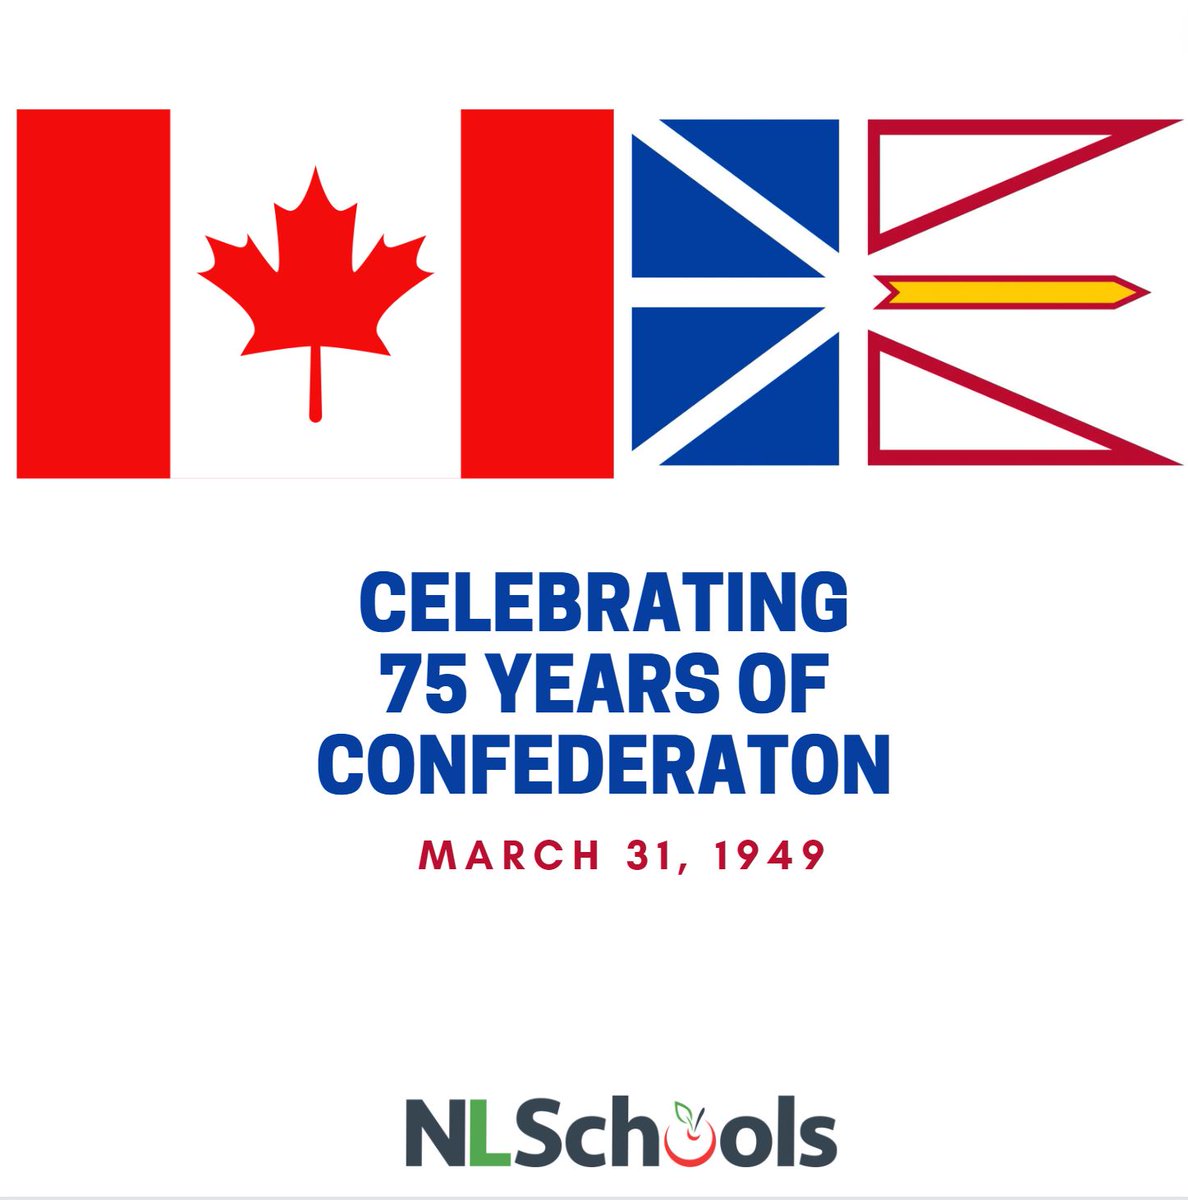 On this day 75 years ago in 1949, Newfoundland became Canada’s 10th province. Since that time, Newfoundland has been an important part of Canada and has helped shape its national identity. We hope everyone takes the time to reflect on our history, present, and our future.